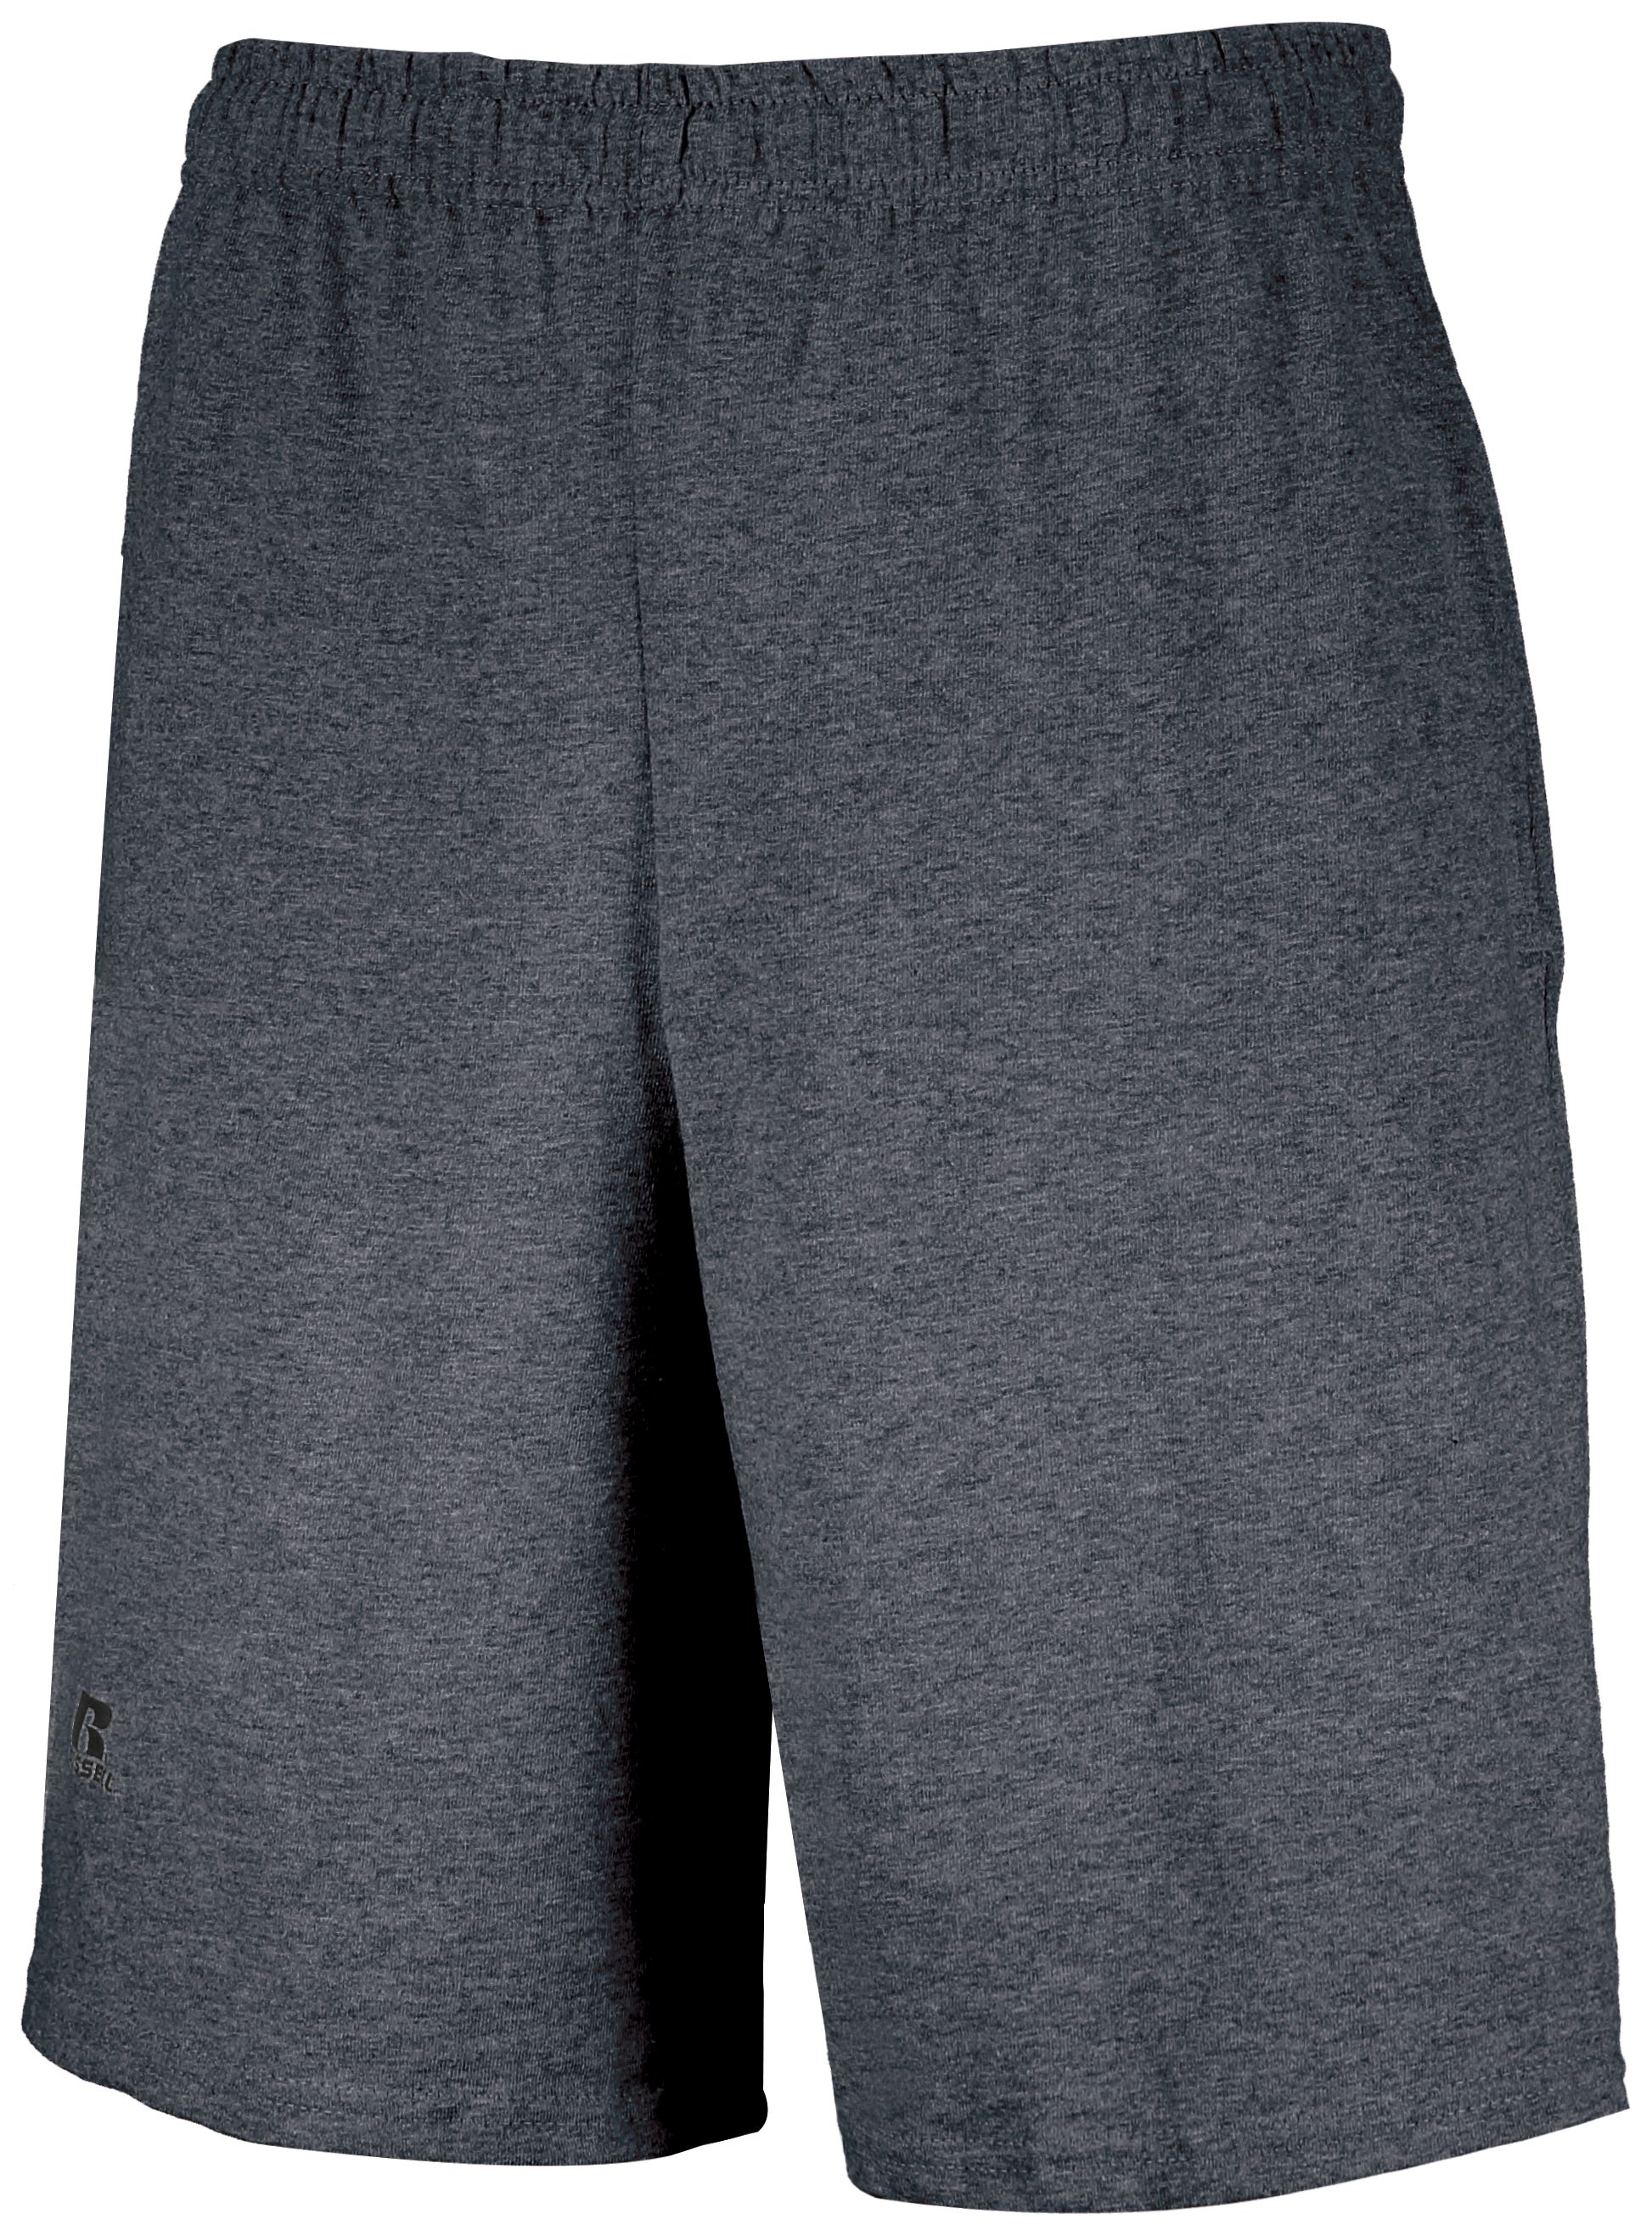 Russell Athletic 25843M - Basic Cotton Pocket Shorts $9.24 - Bottoms